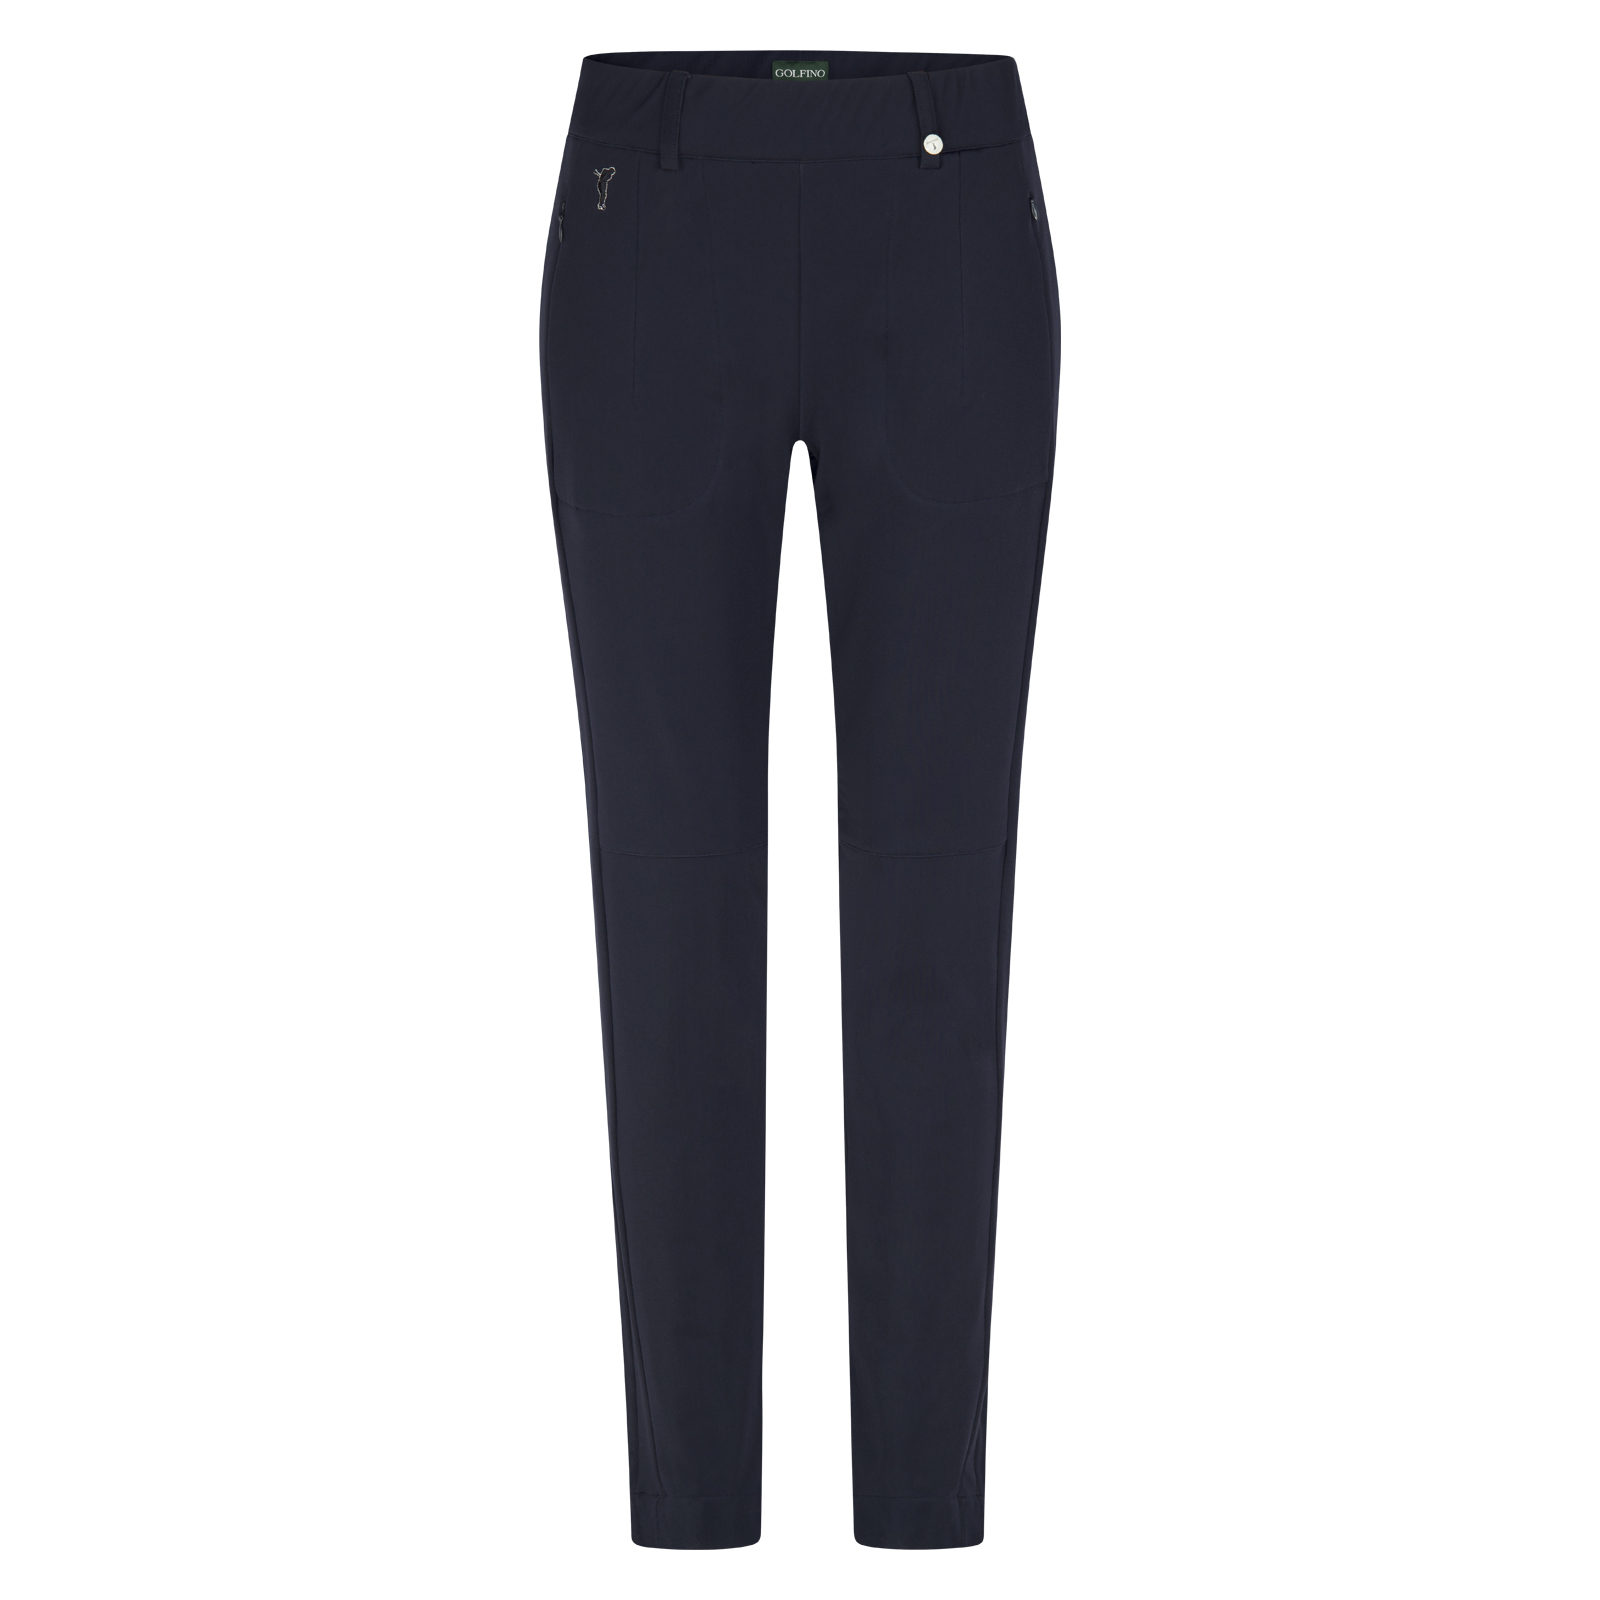 Ladies' stretch golf trousers in relaxed loose fit design